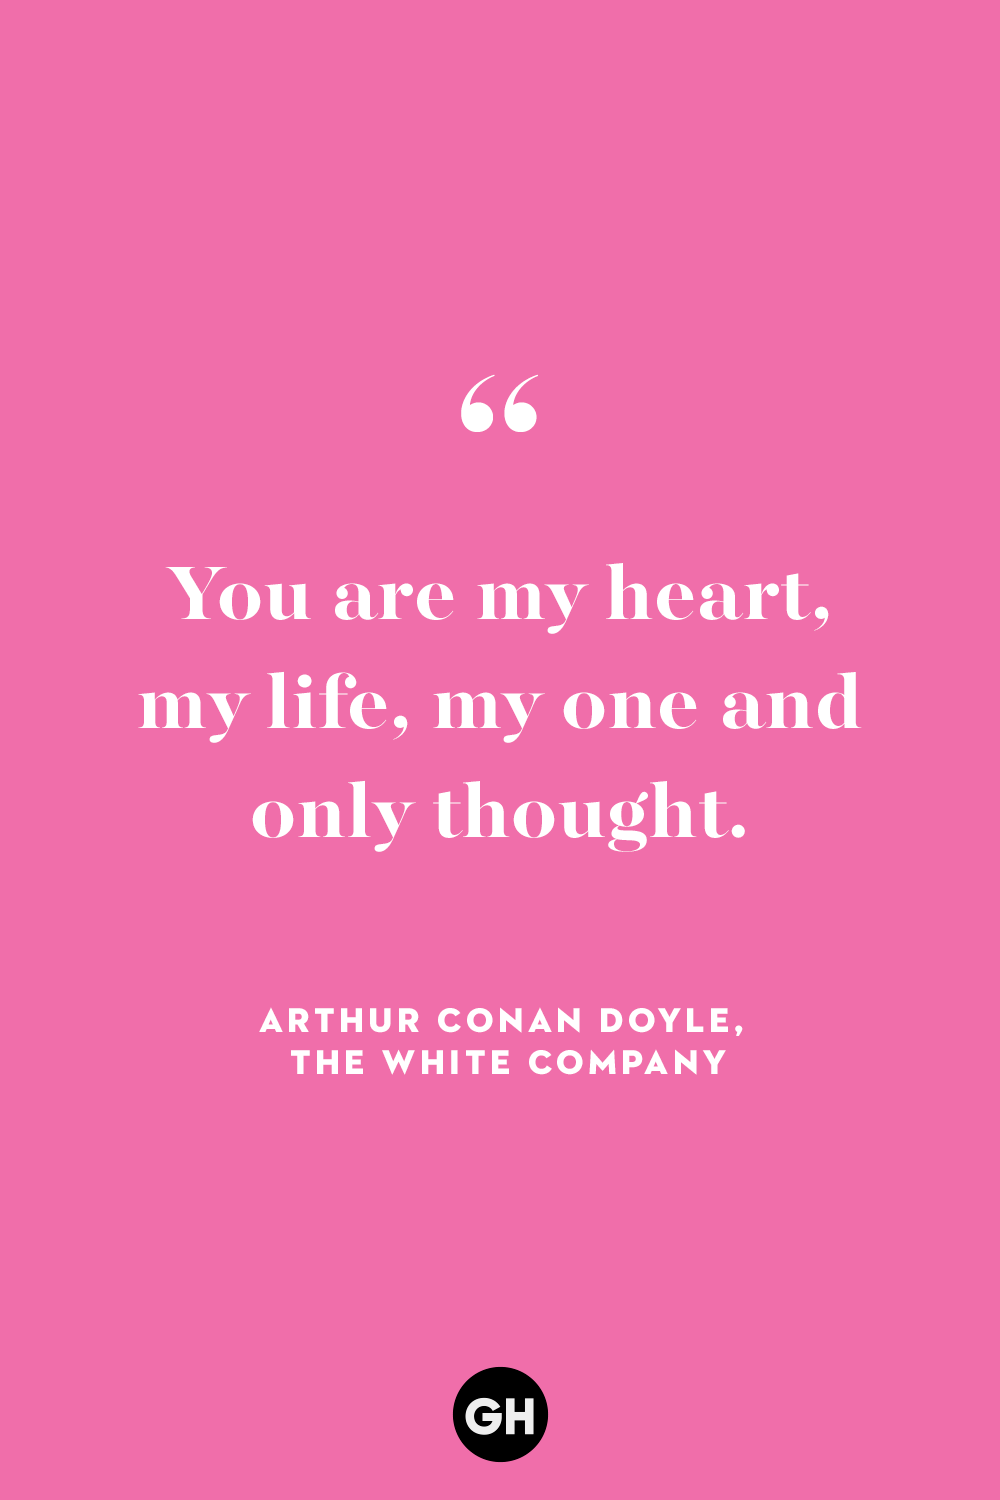 40 Best Love Quotes Romantic Sayings For Him